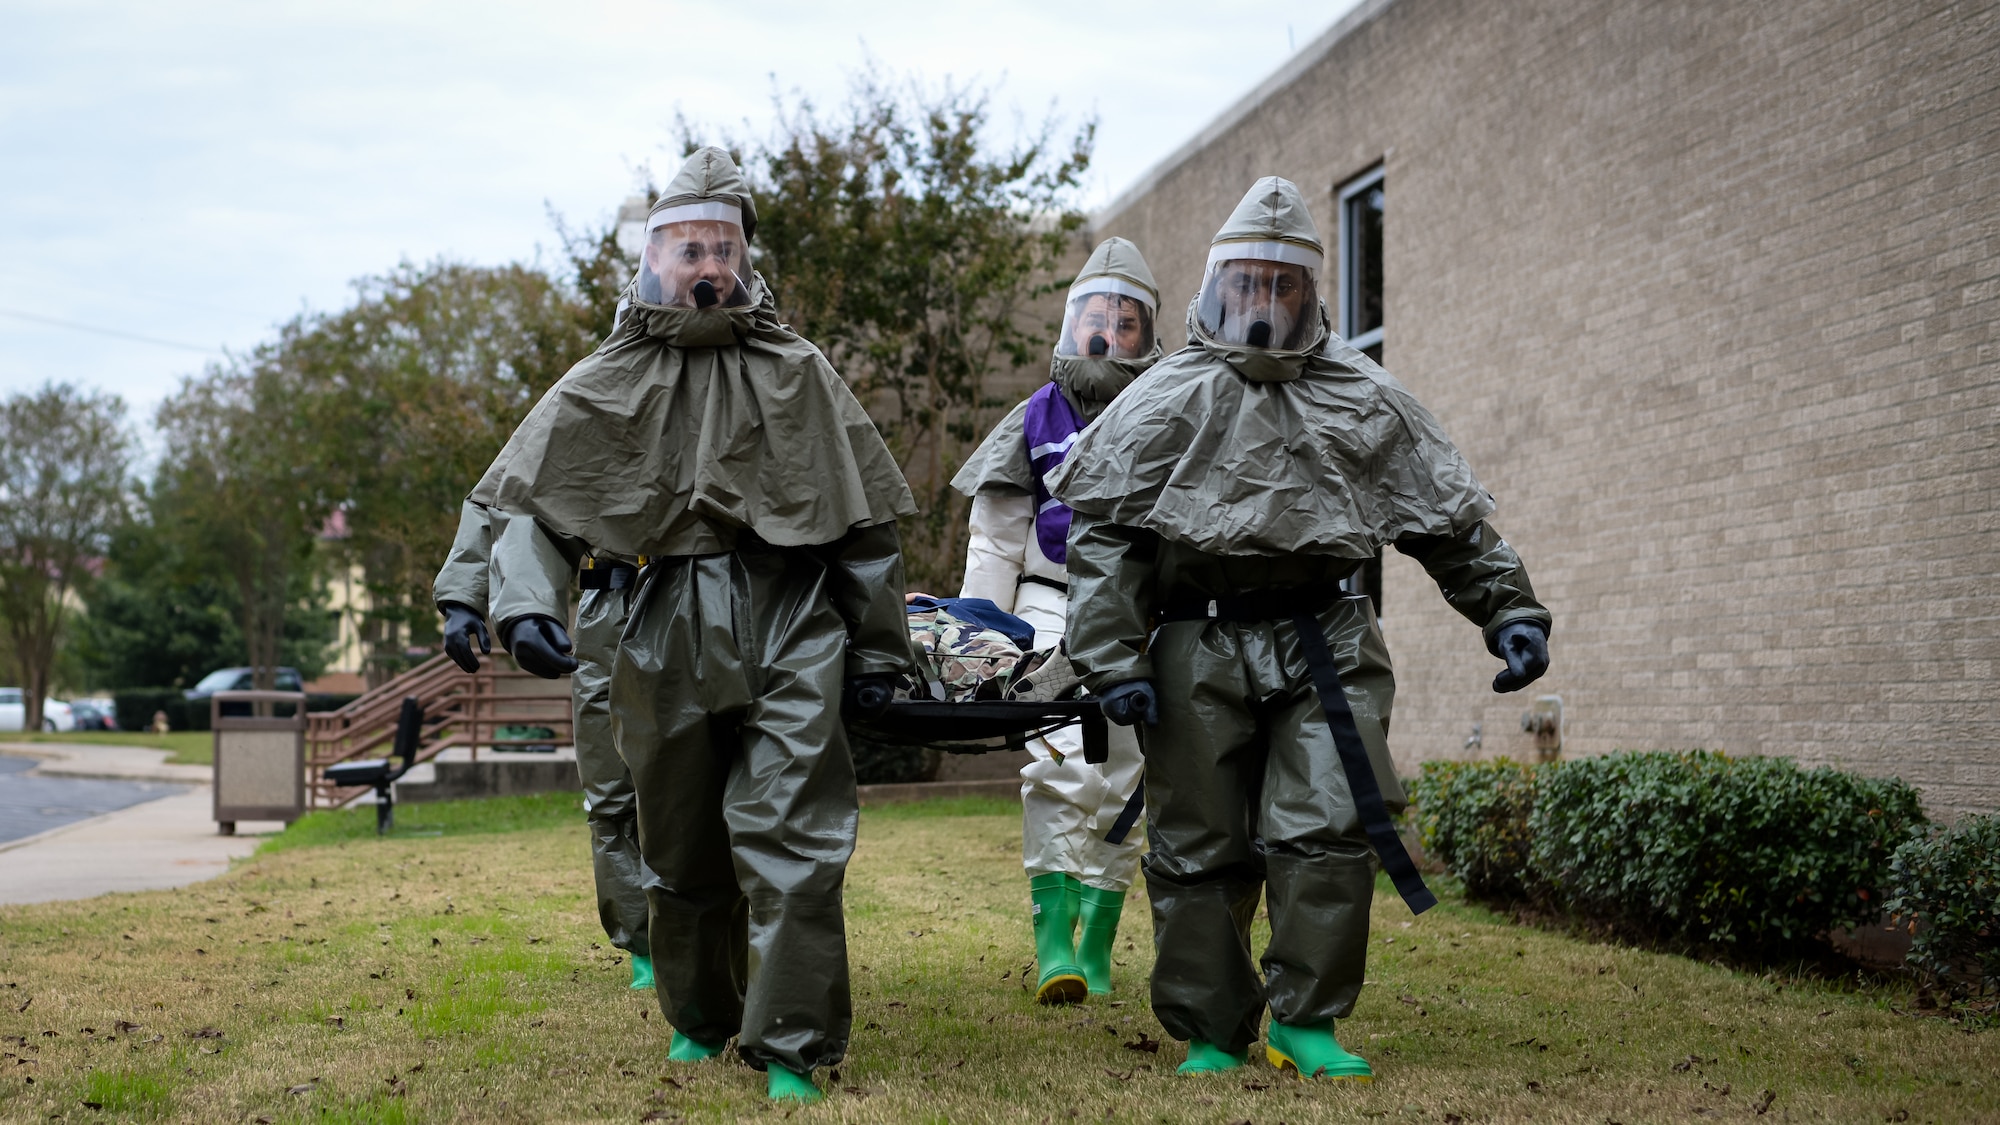 Decontamination team members from the 2d Medical Group carry a simulated chemical attack victim on a litter during a decontamination exercise on Barksdale Air Force Base, La., Nov. 15, 2017. Home station medical response includes decontamination, triage and a security team which uses the PAPR, a power air purified respirator suit which provides protection against CBRN agents. (U.S. Air Force photo by Staff Sgt. Benjamin Raughton)